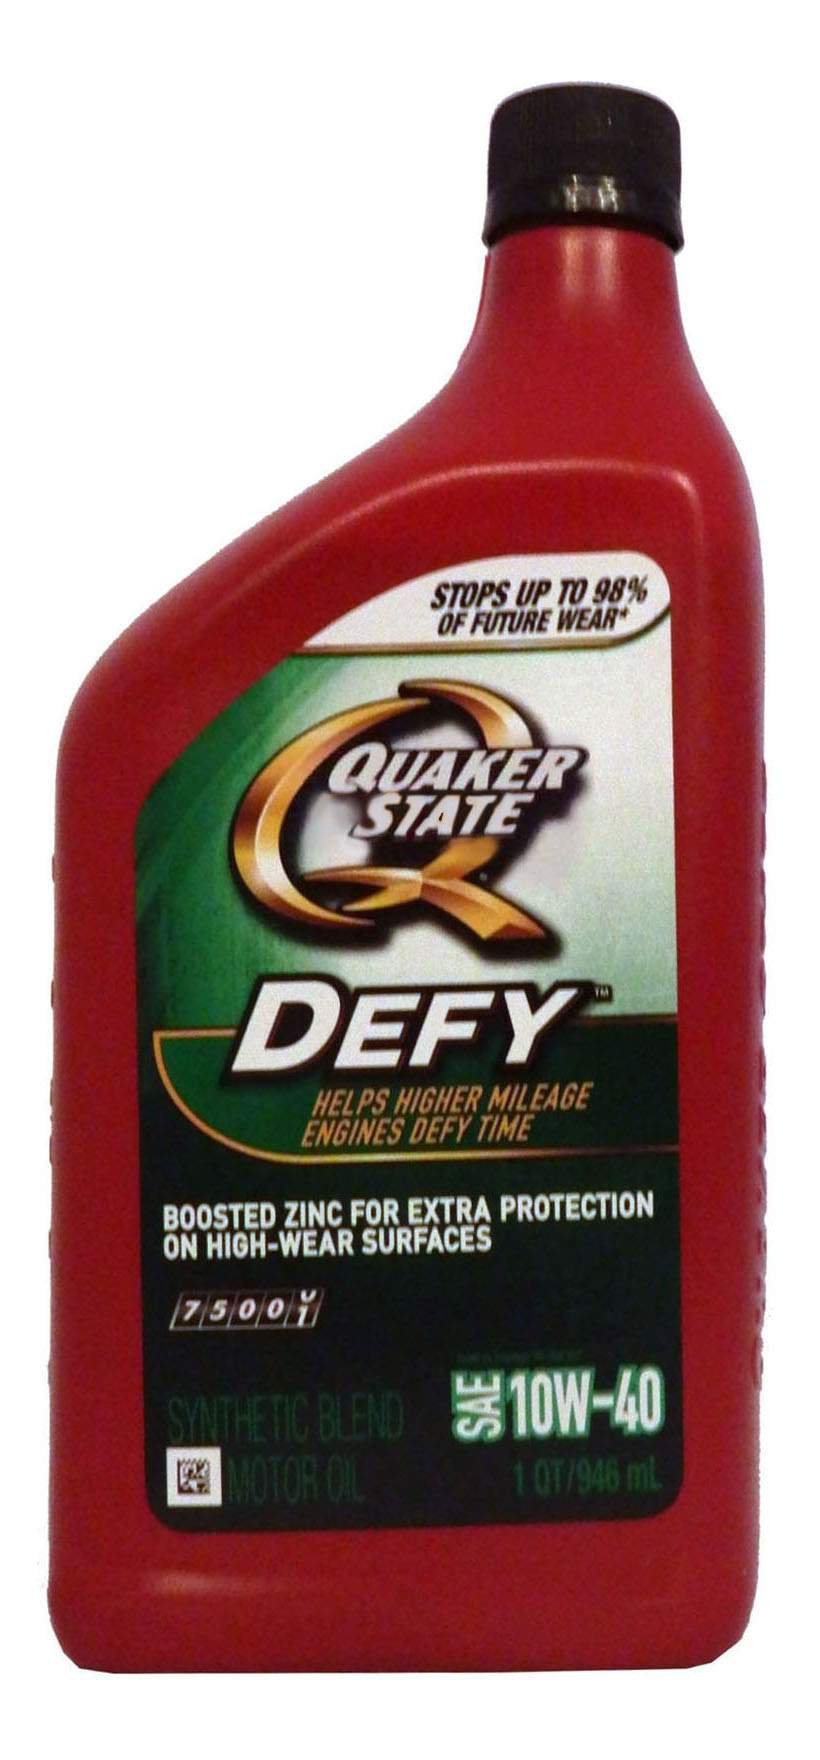 Quaker State Defy Synthetic Blend SAE 10W-40 Motor Oil